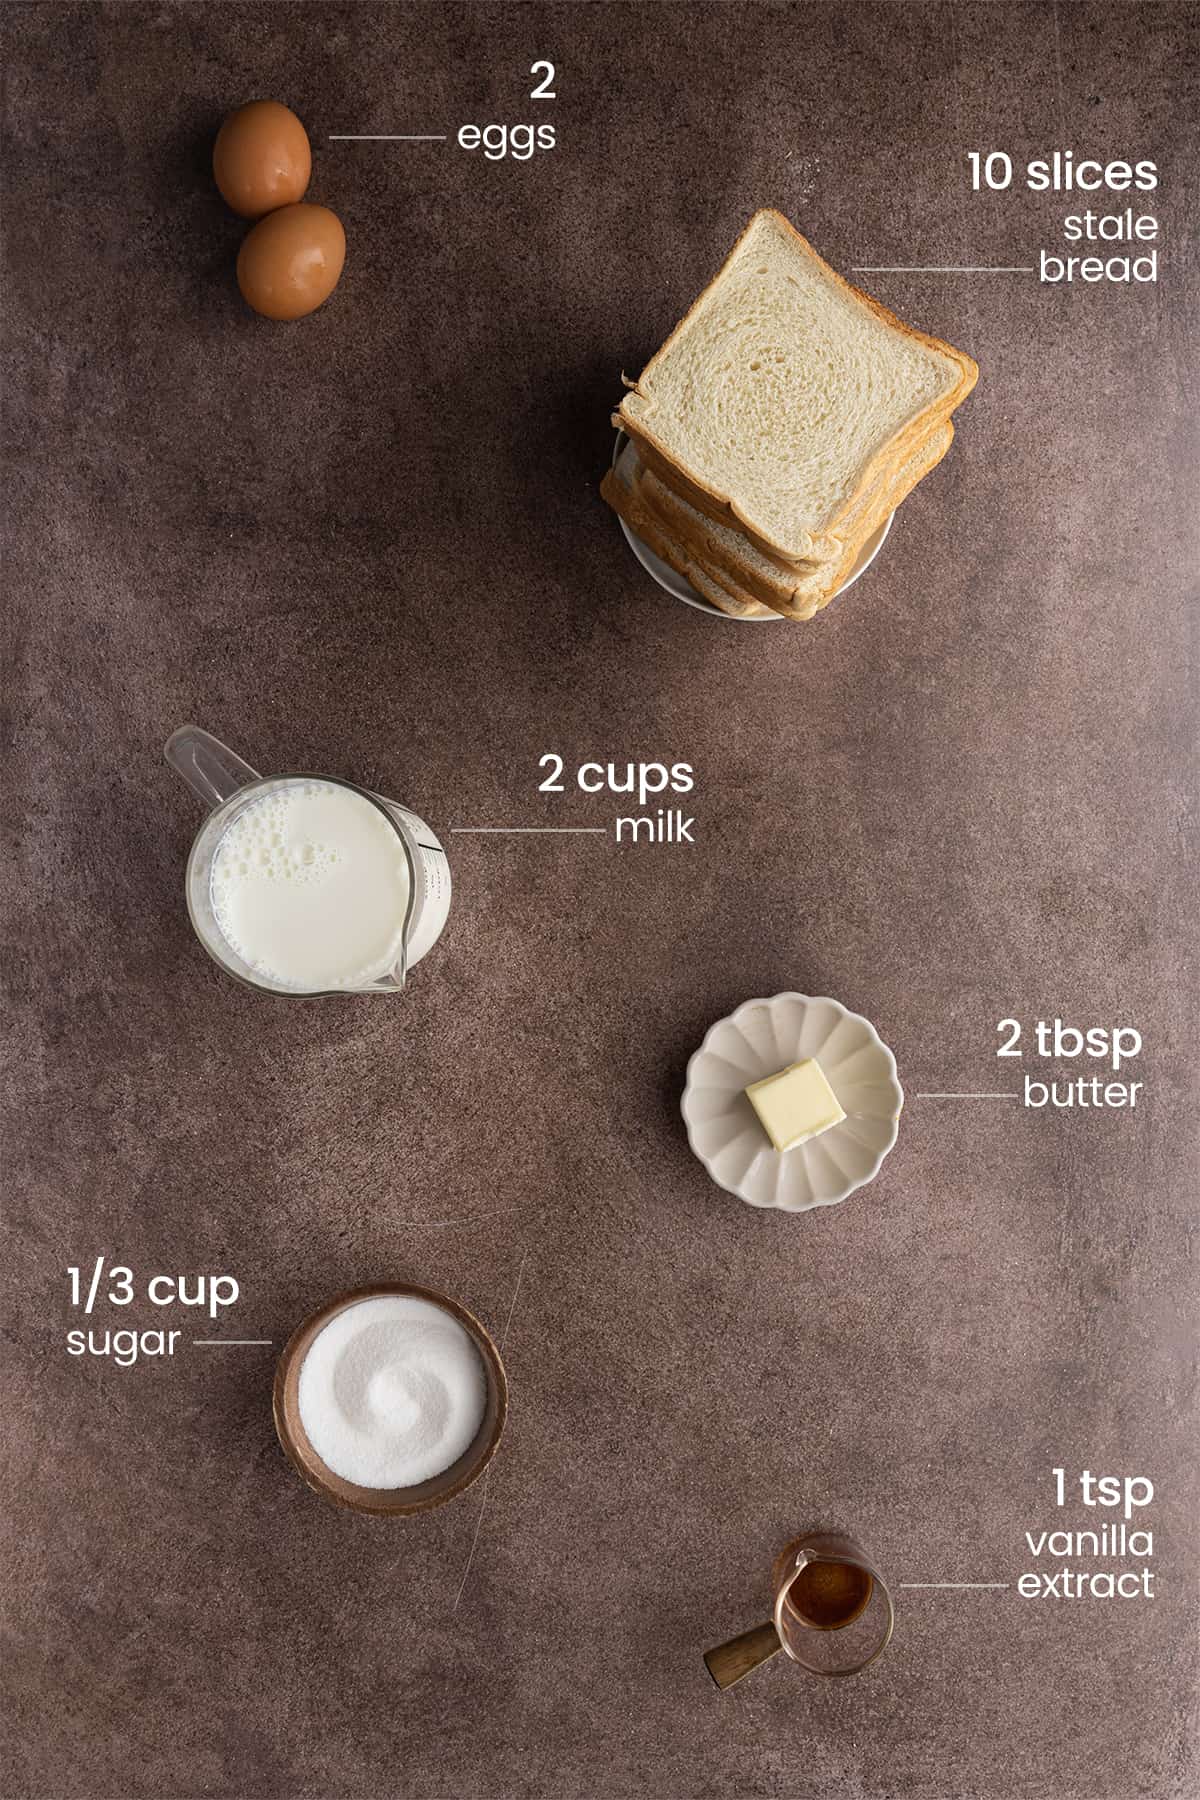 ingredients for bread pudding - eggs, stale bread, milk, butter, sugar, vanilla extract